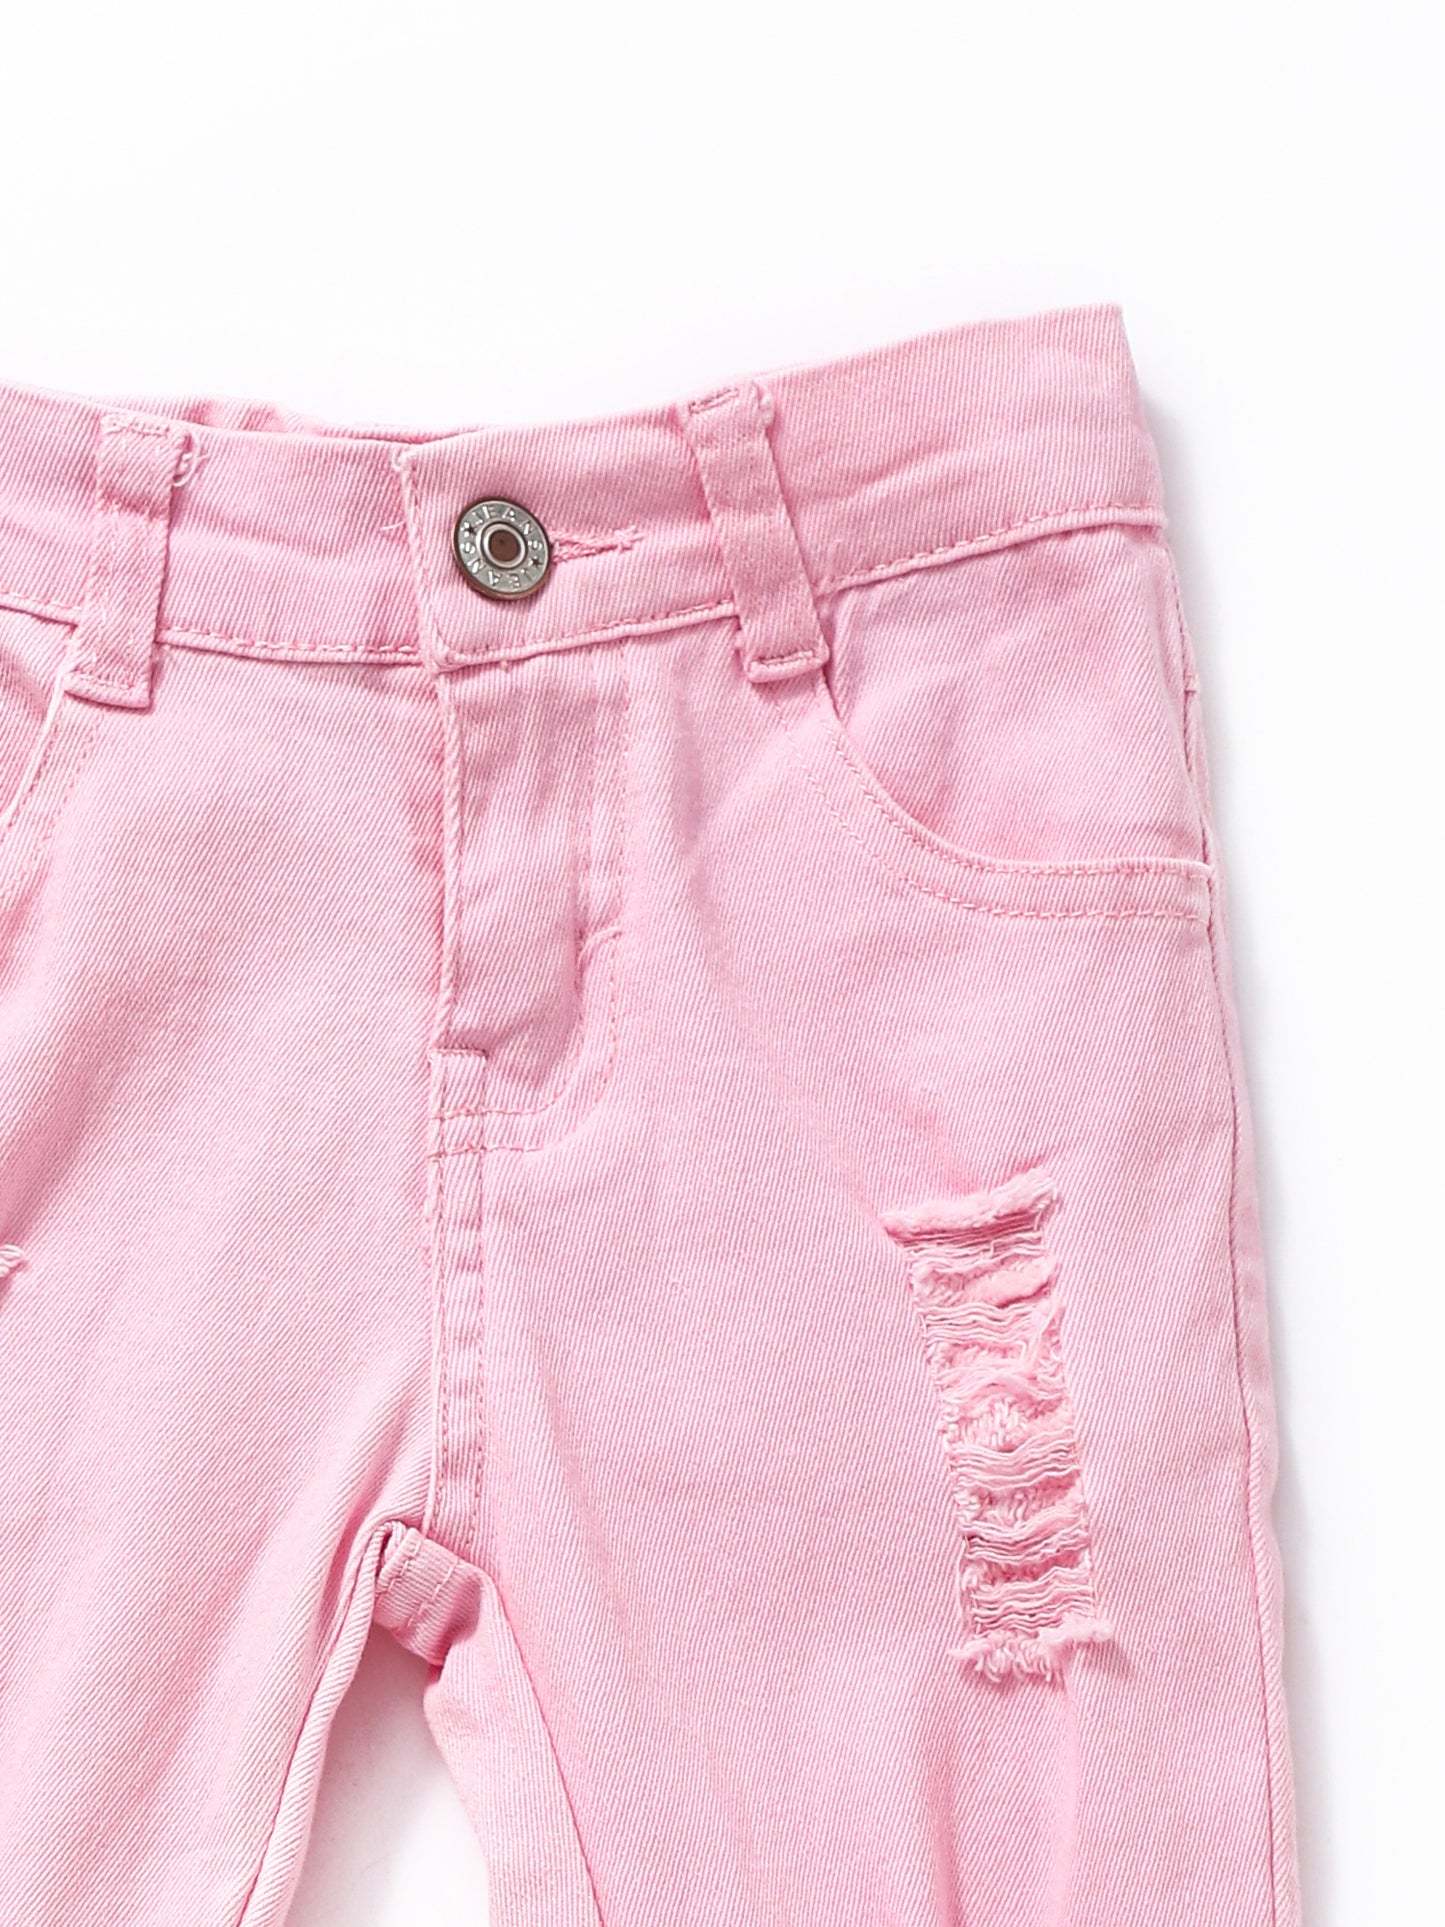 Pink Distressed Double Layer Girls Jeans